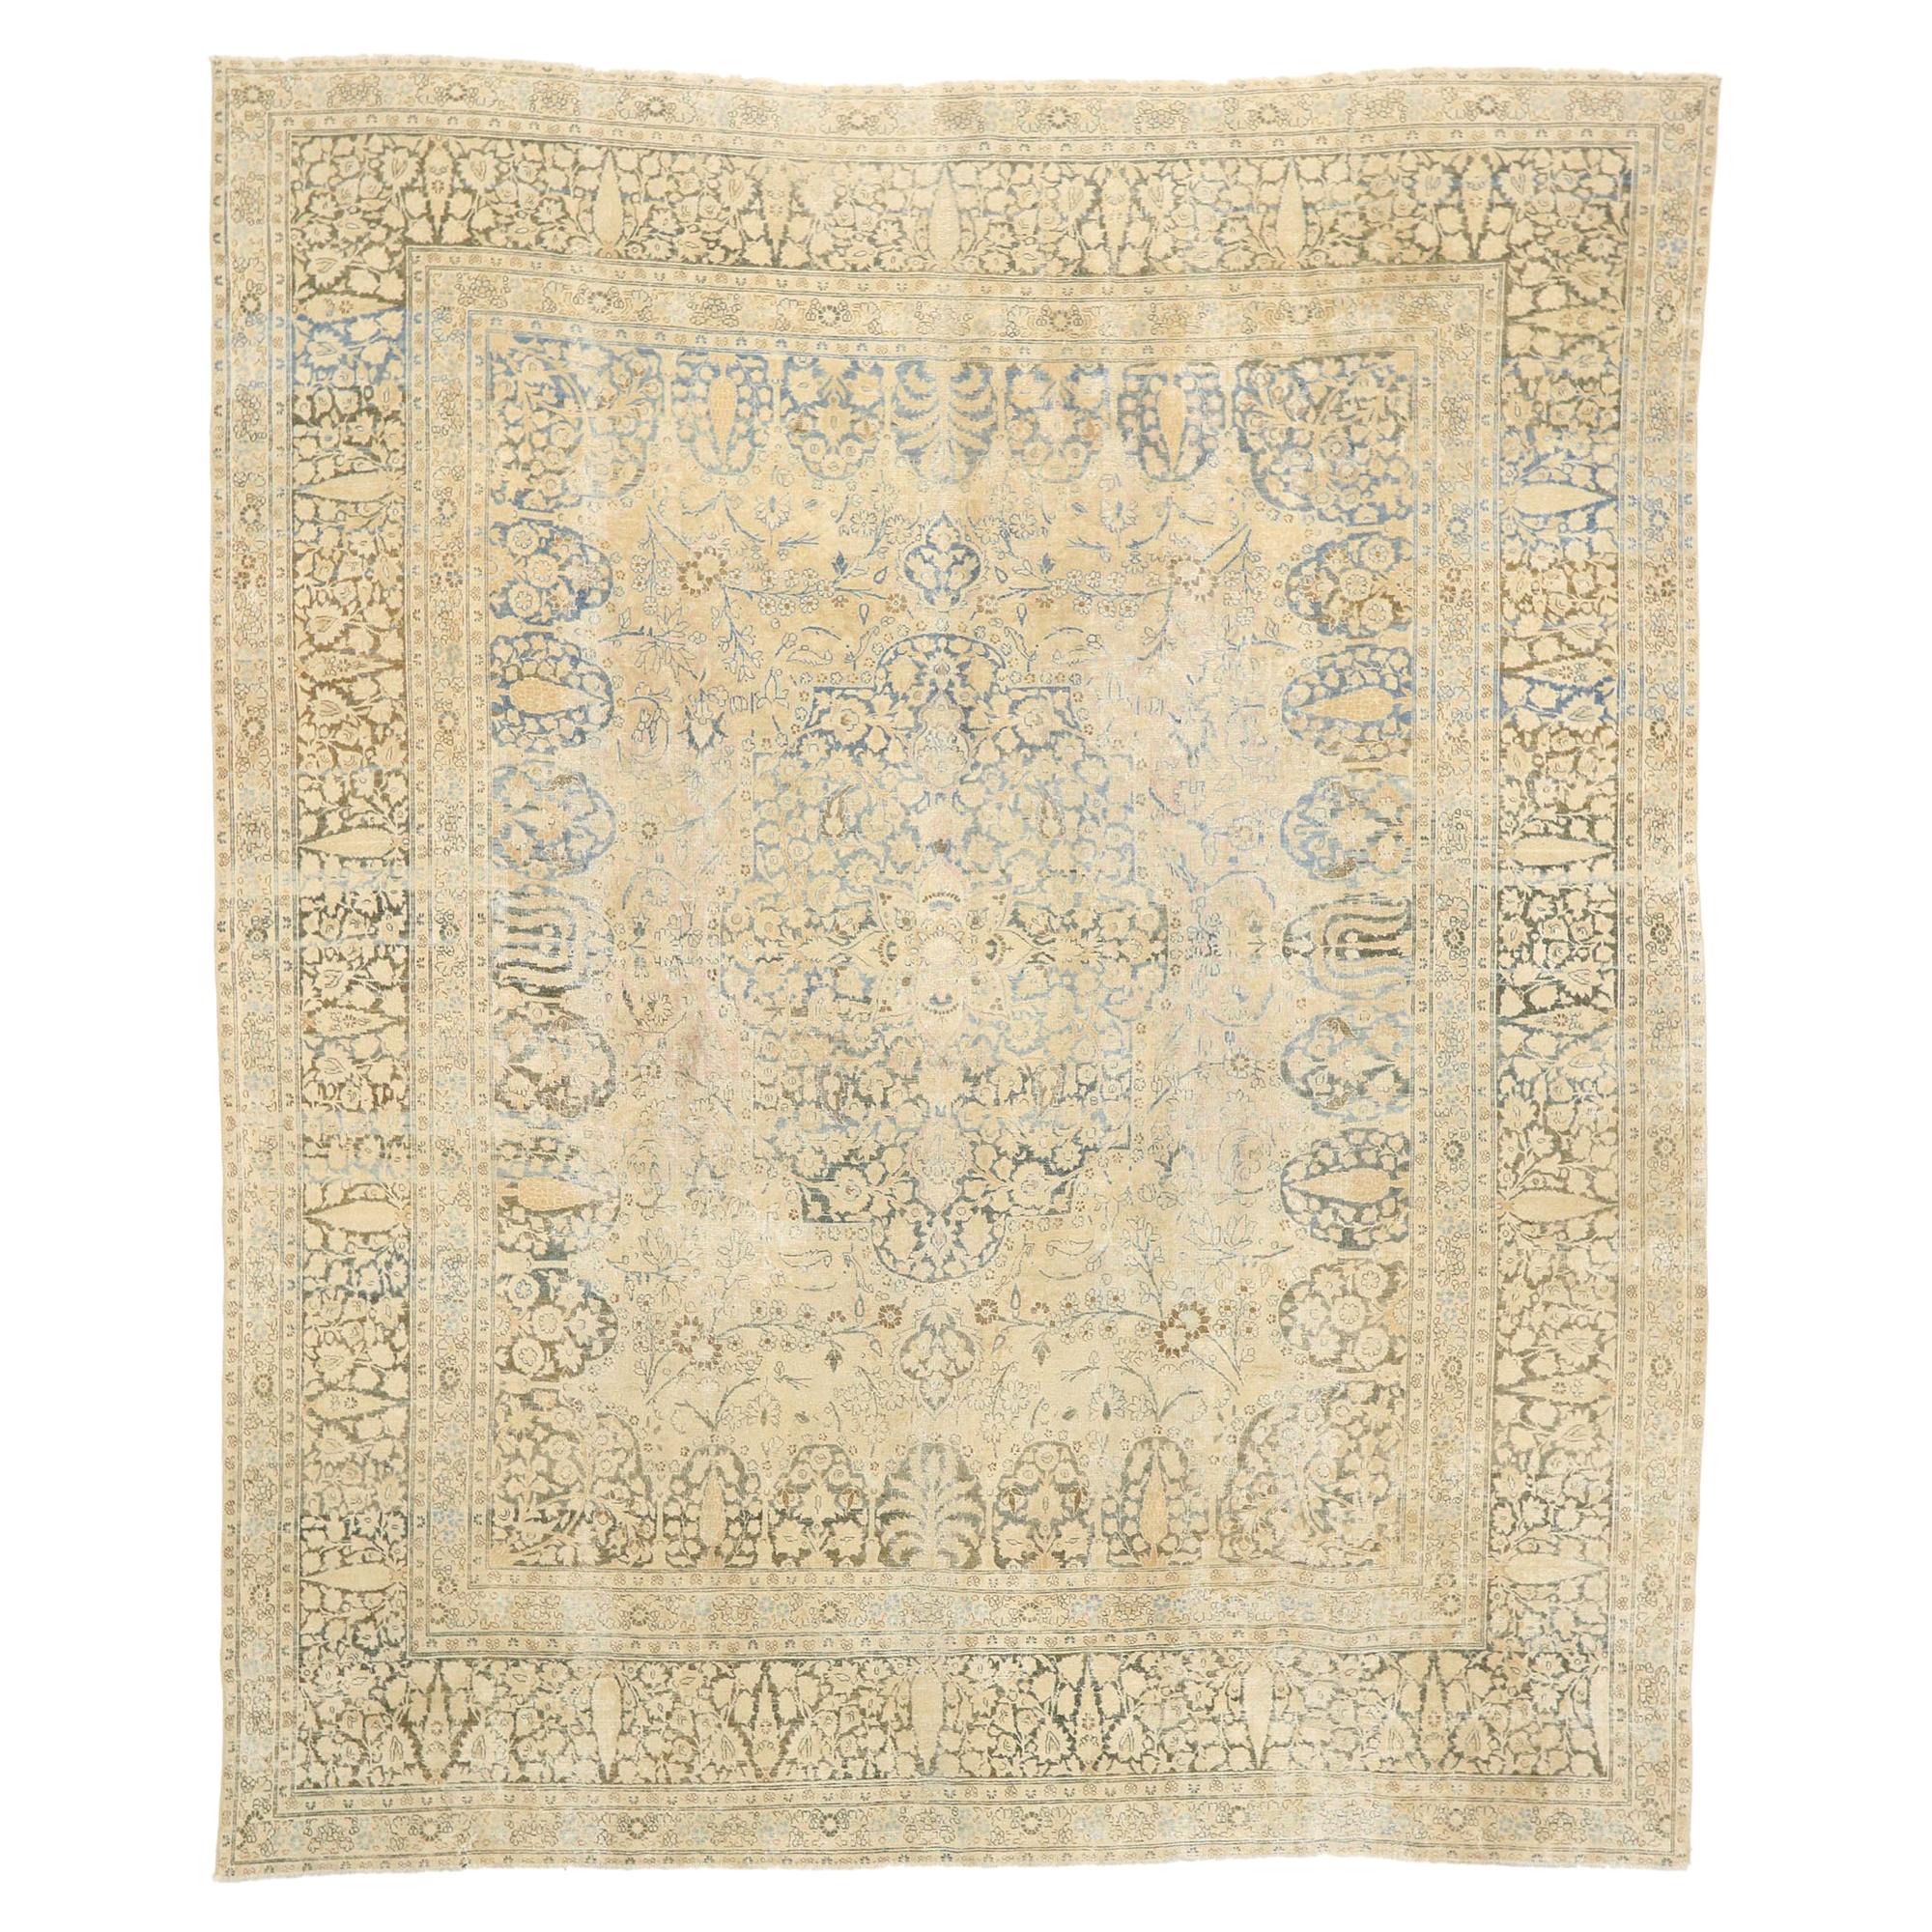 Distressed Antique Persian Tabriz Rug, Cozy Cotswolds Meets Rustic Luxe